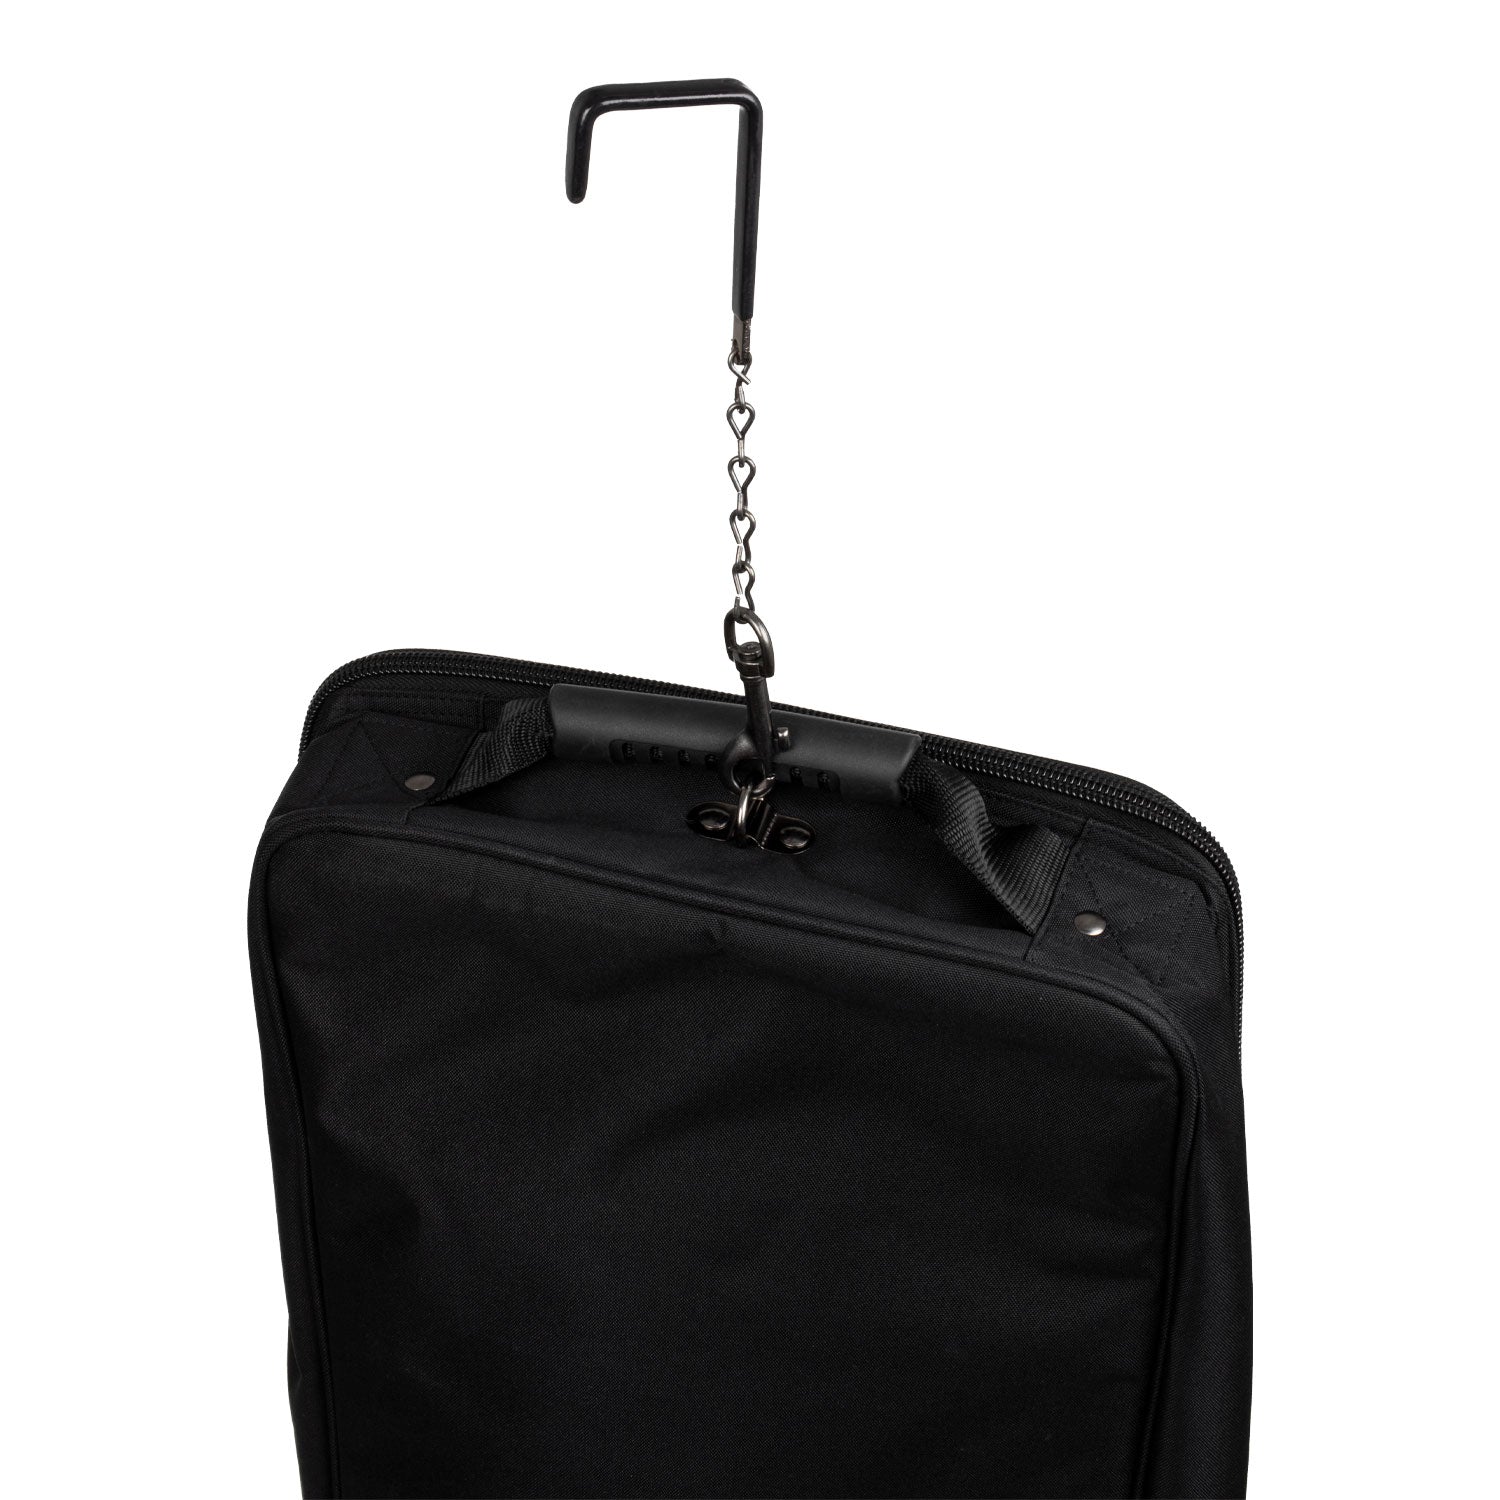 bridle bag with storage